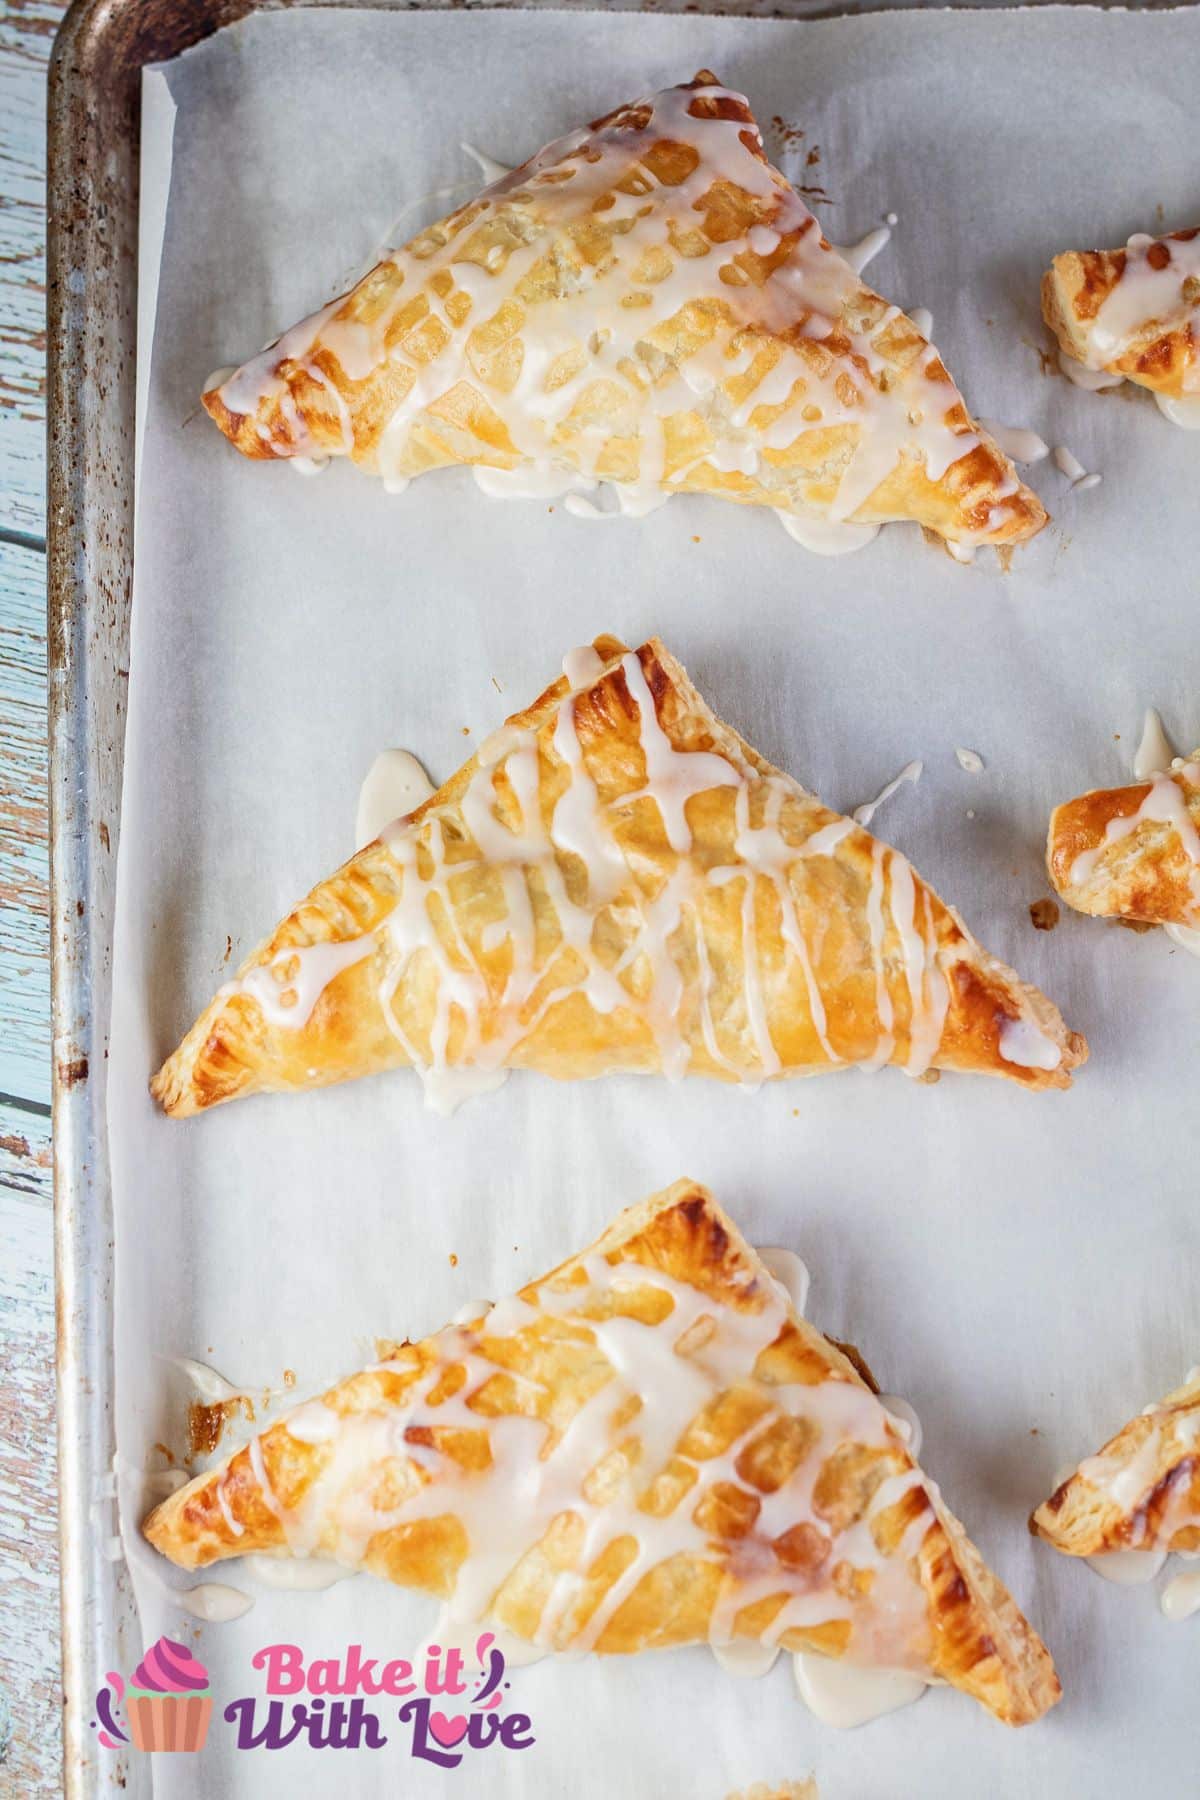 Easy puff pastry apple turnovers on baking sheet after adding vanilla icing drizzle.